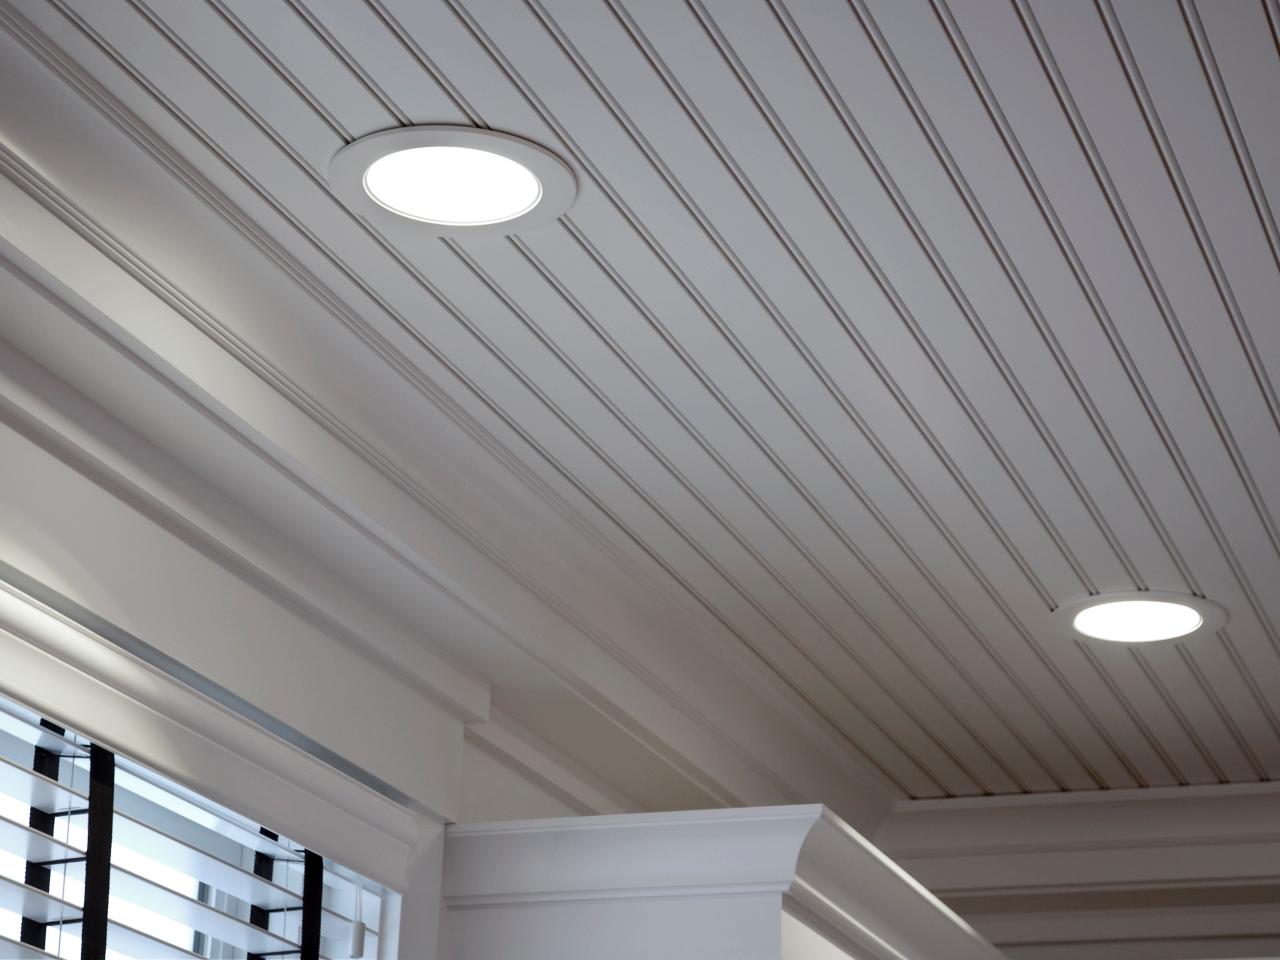 Install Recessed Lighting Hgtv,Most Beautiful Cities In Us